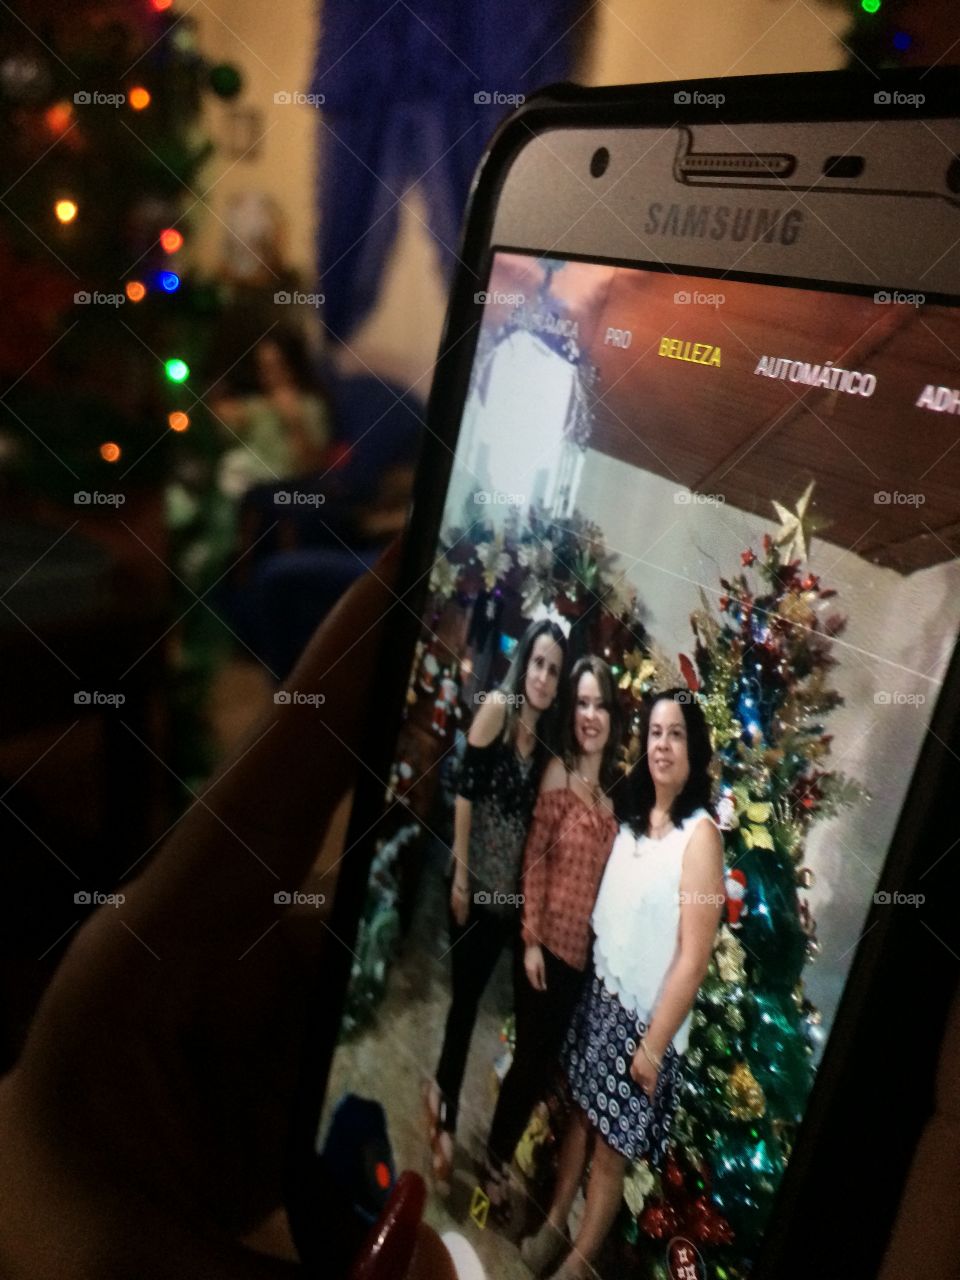 Sister in the Christmas (Samsung)